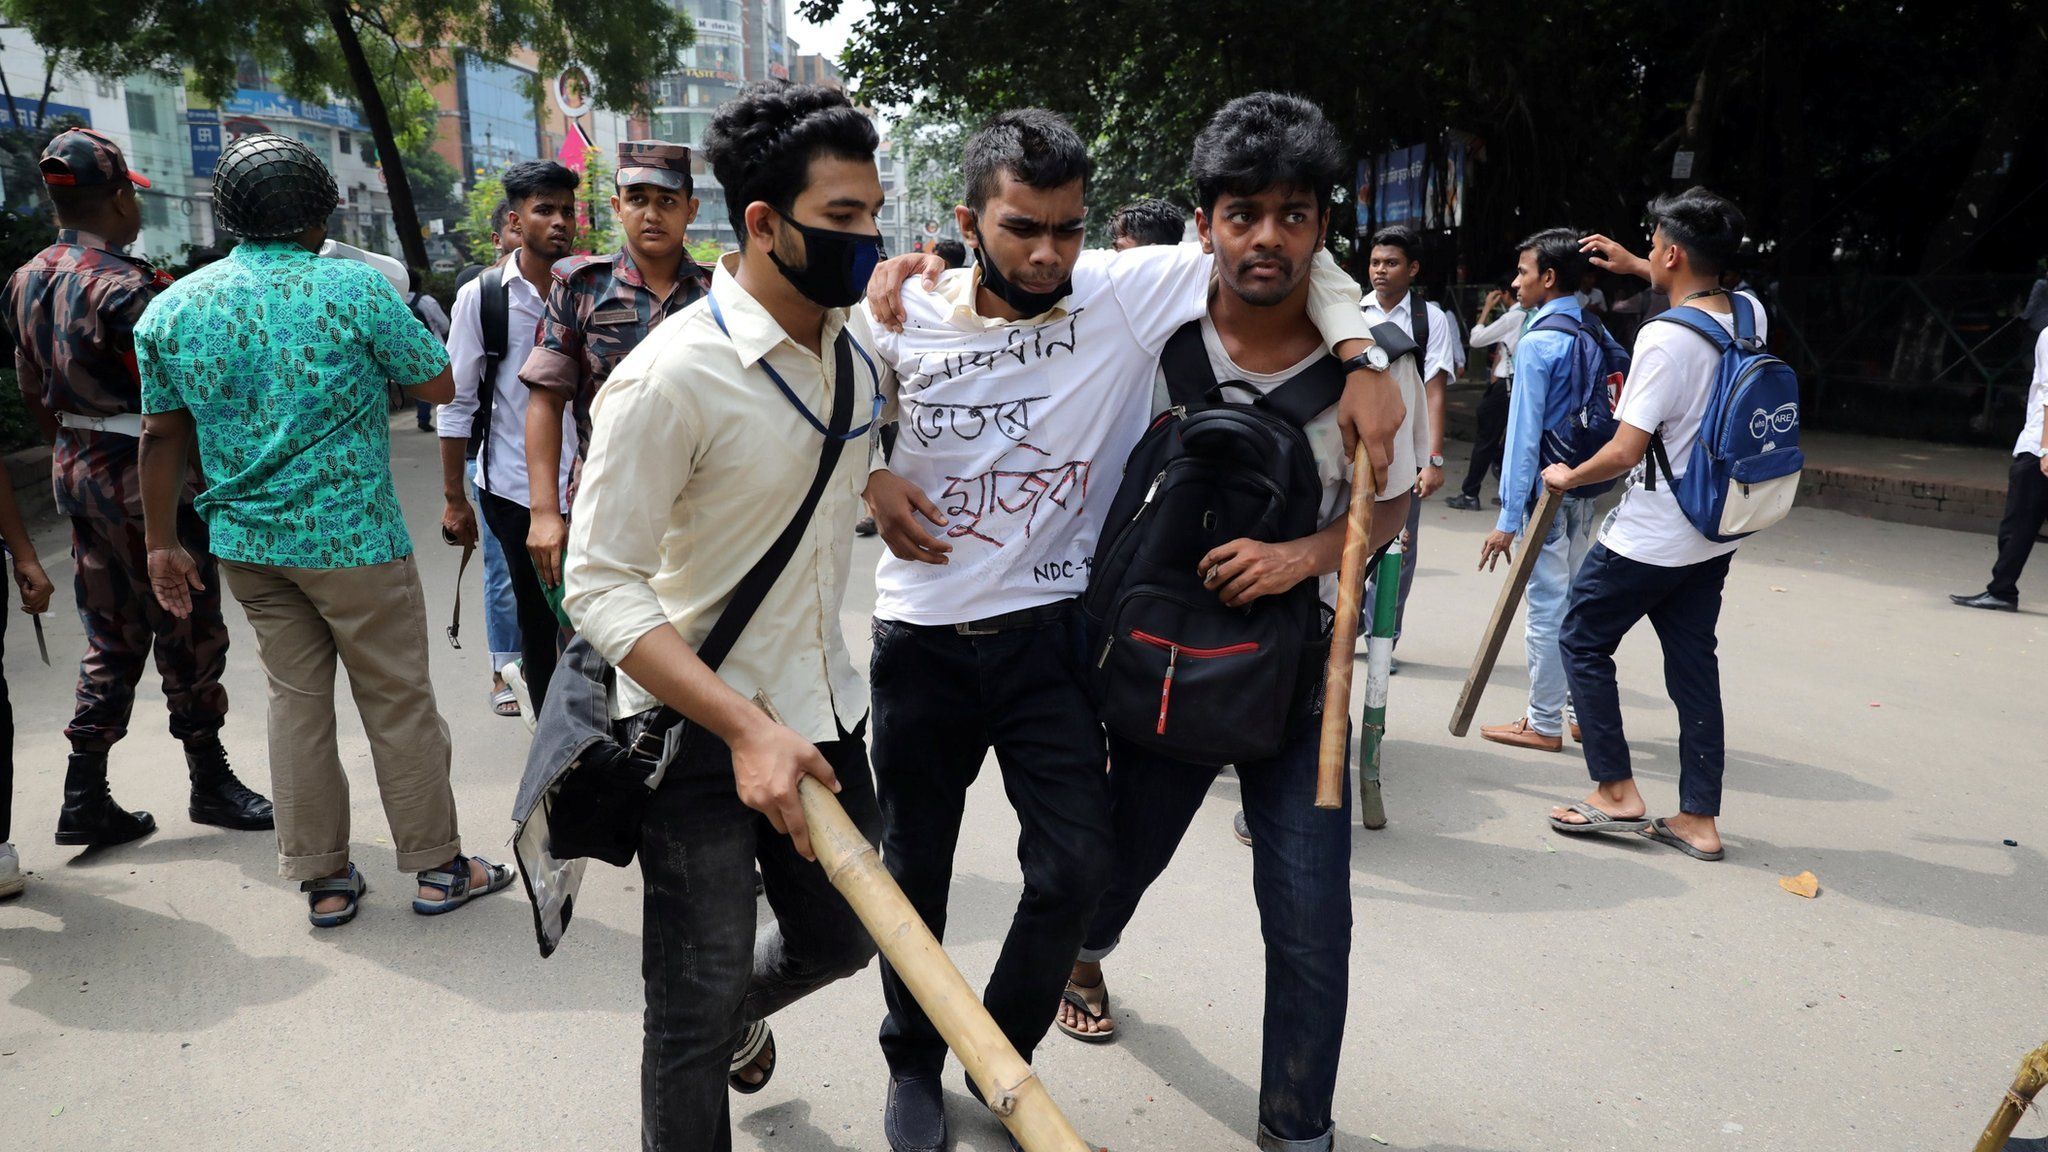 Injured student helped by fellow students during clashes - 4 August